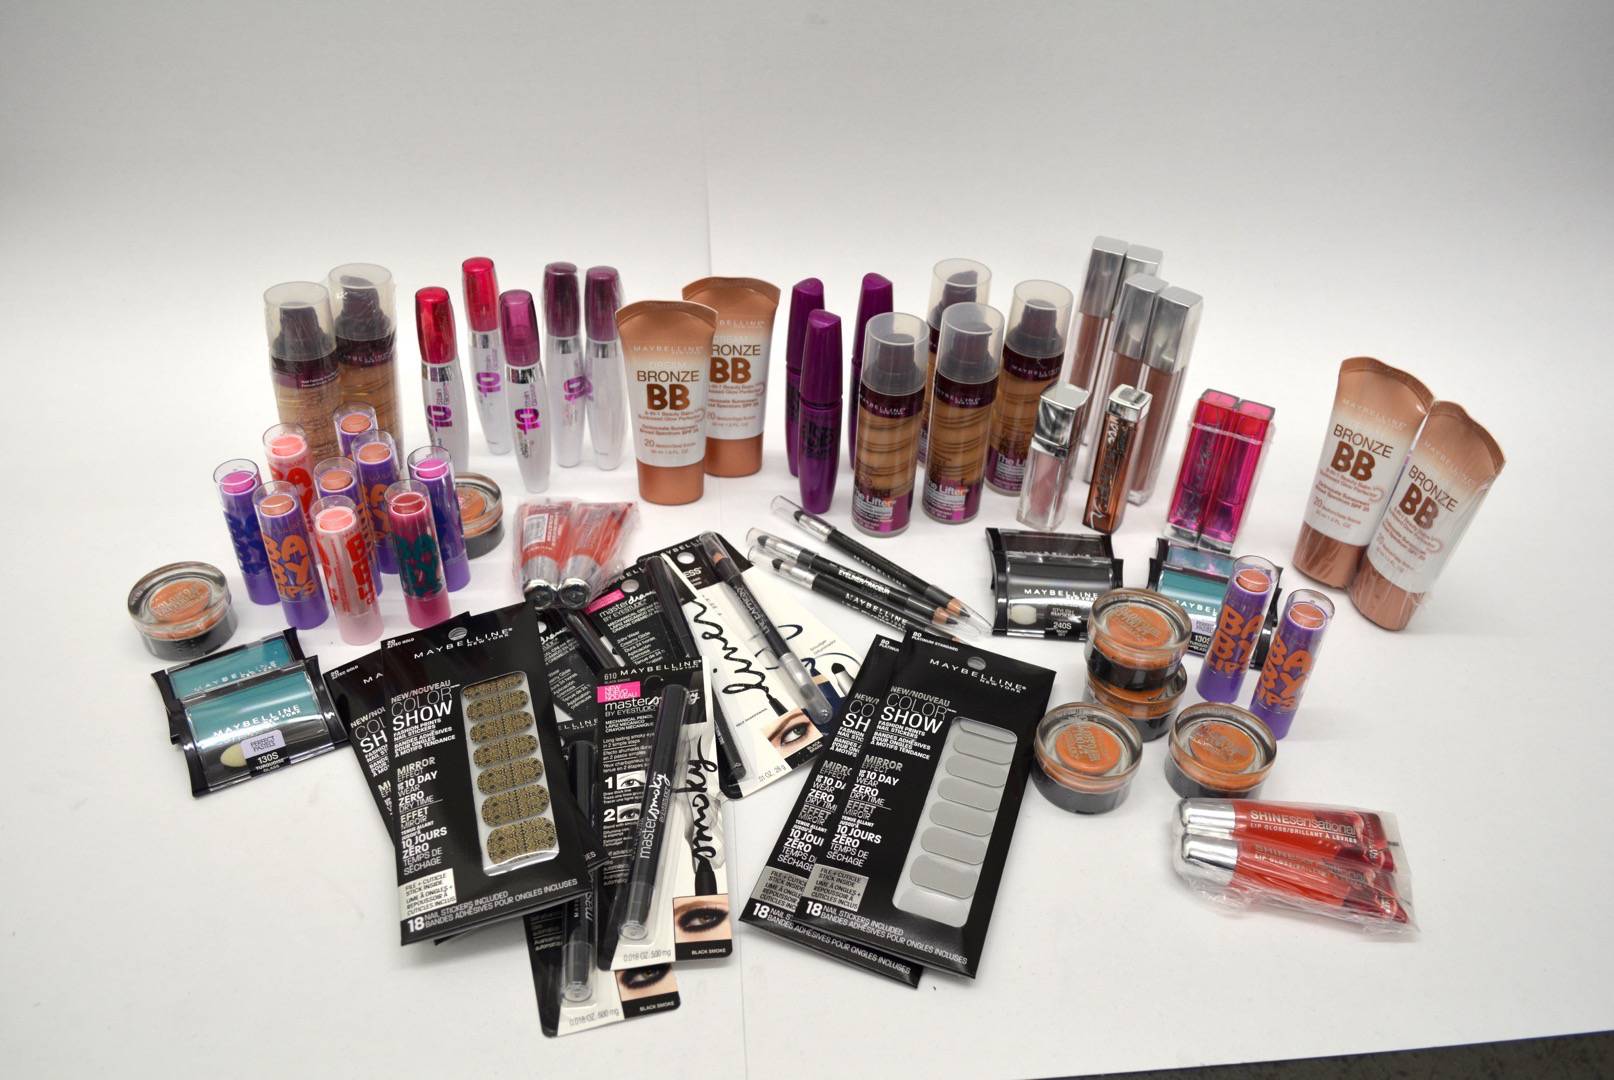 Maybelline New Overstock Cosmetic Lots - Assorted Case Packs of 250 units of New Overstock Maybelline Cosmetics. Partially Manifested.